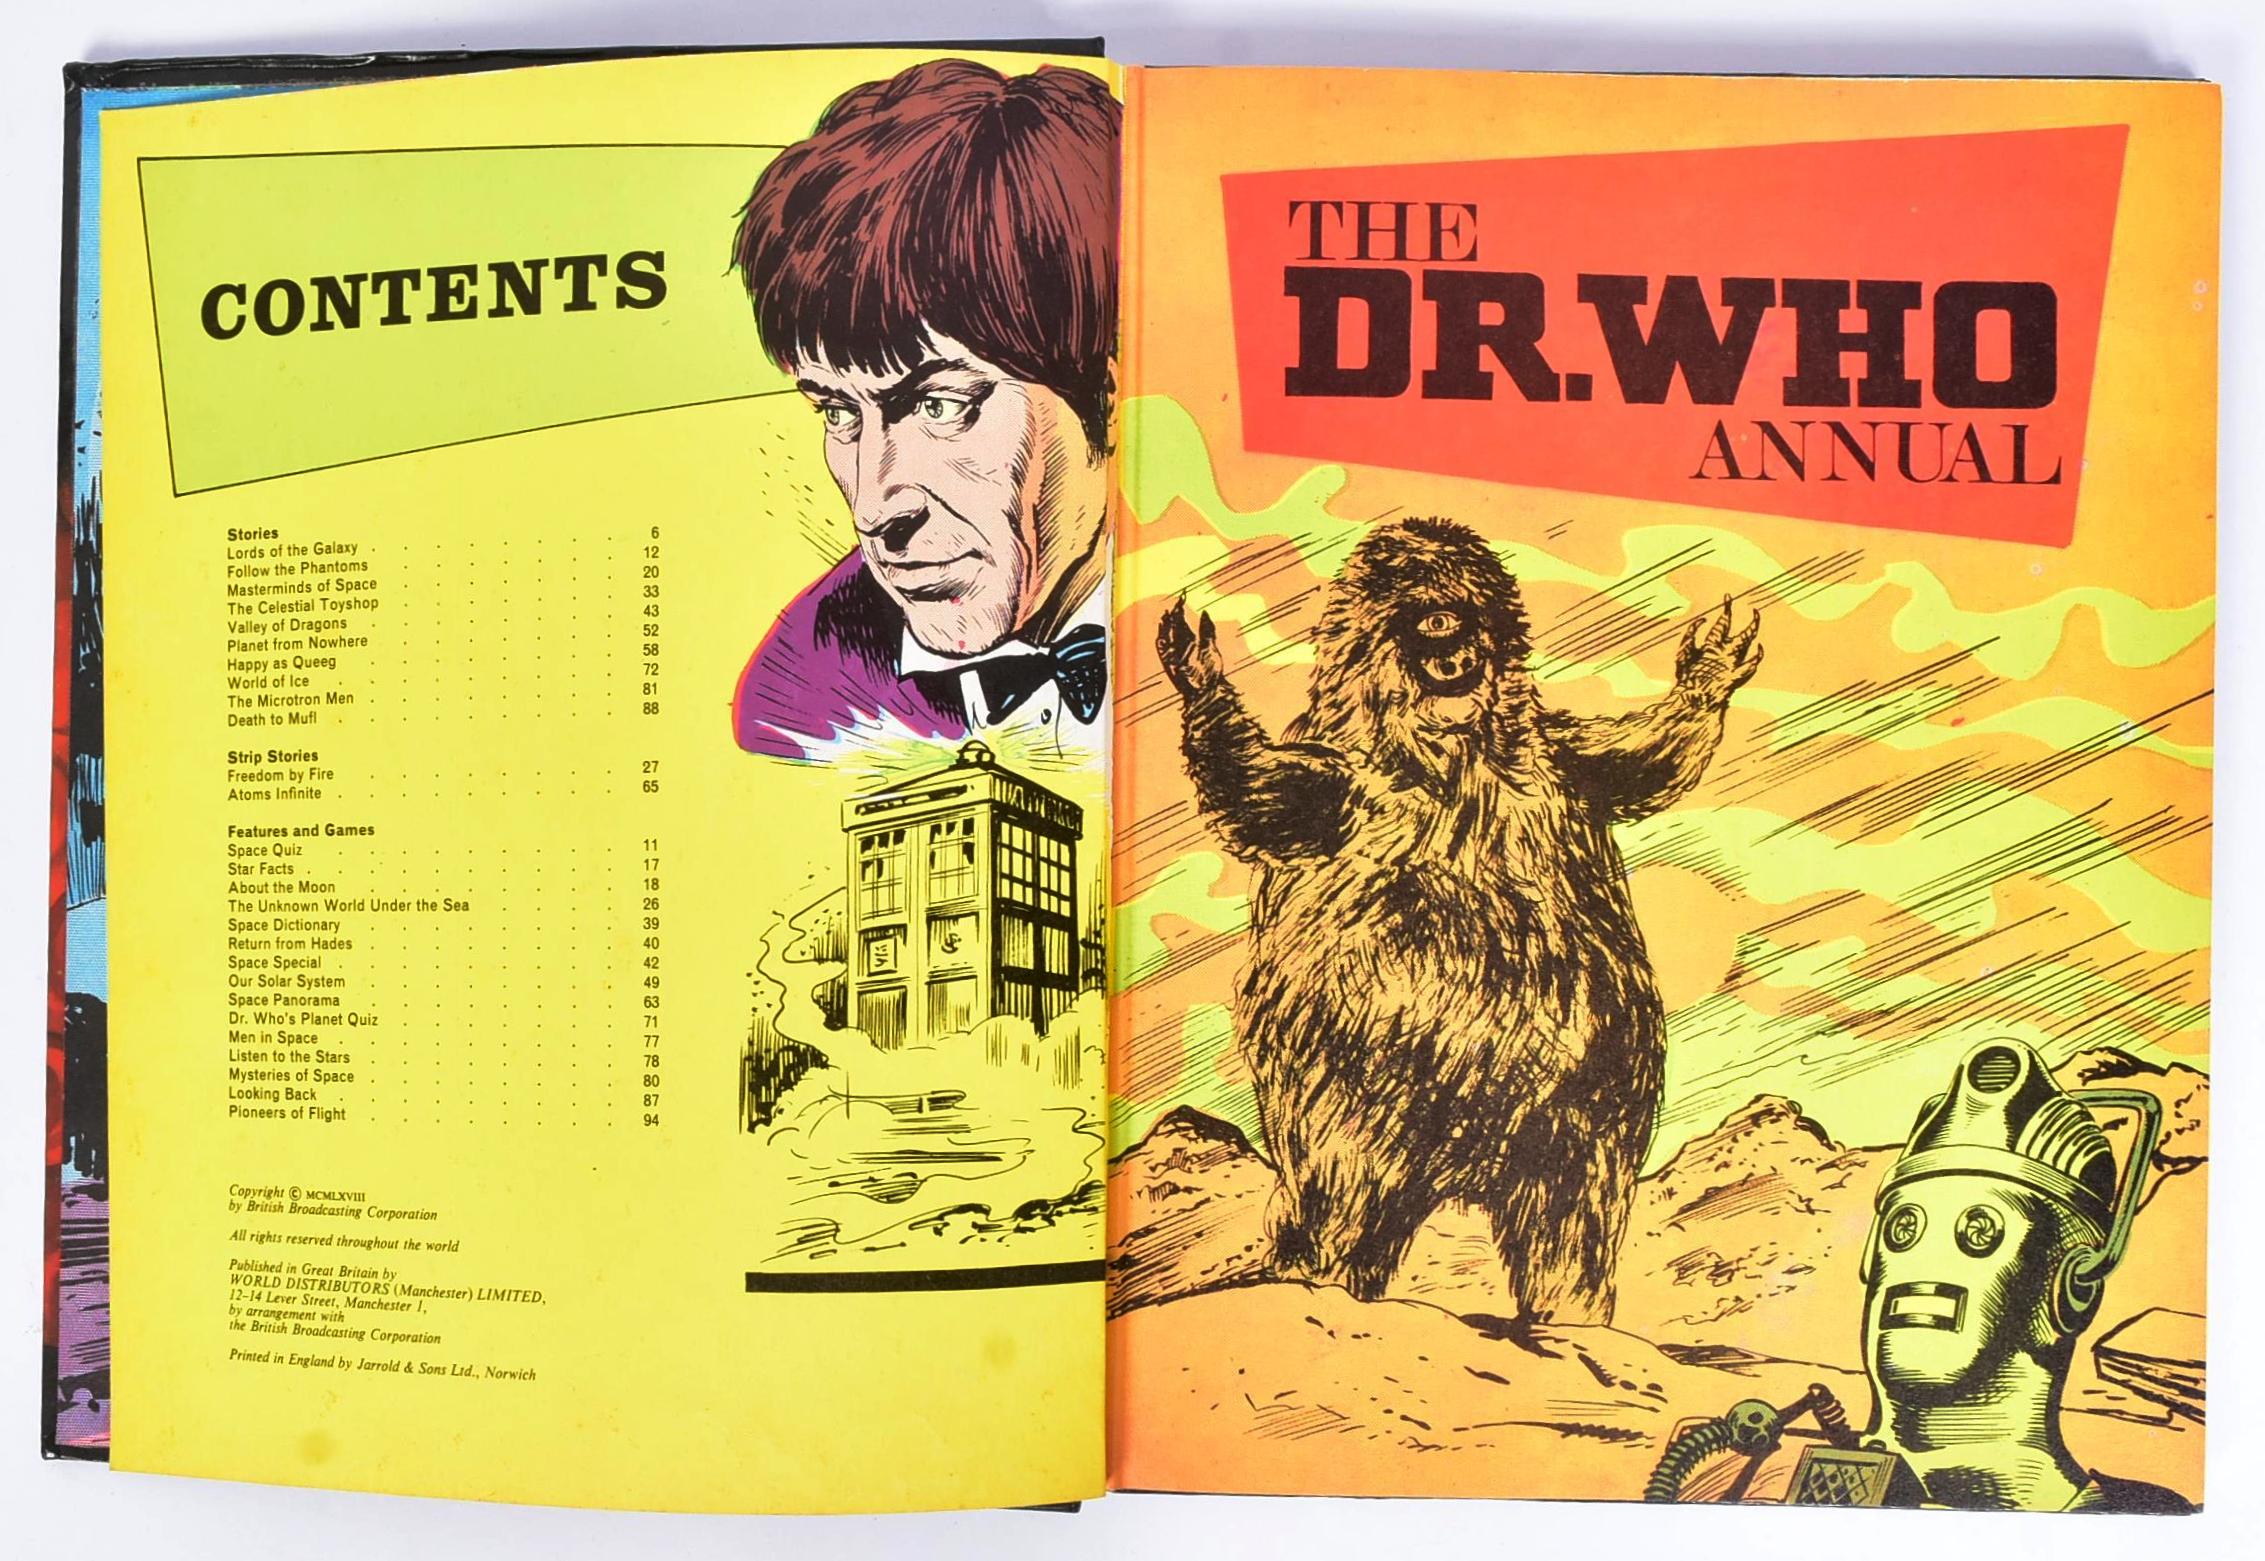 DOCTOR WHO - THE DR WHO ANNUAL 1968 - PATRICK TROUGHTON ERA - Image 3 of 5